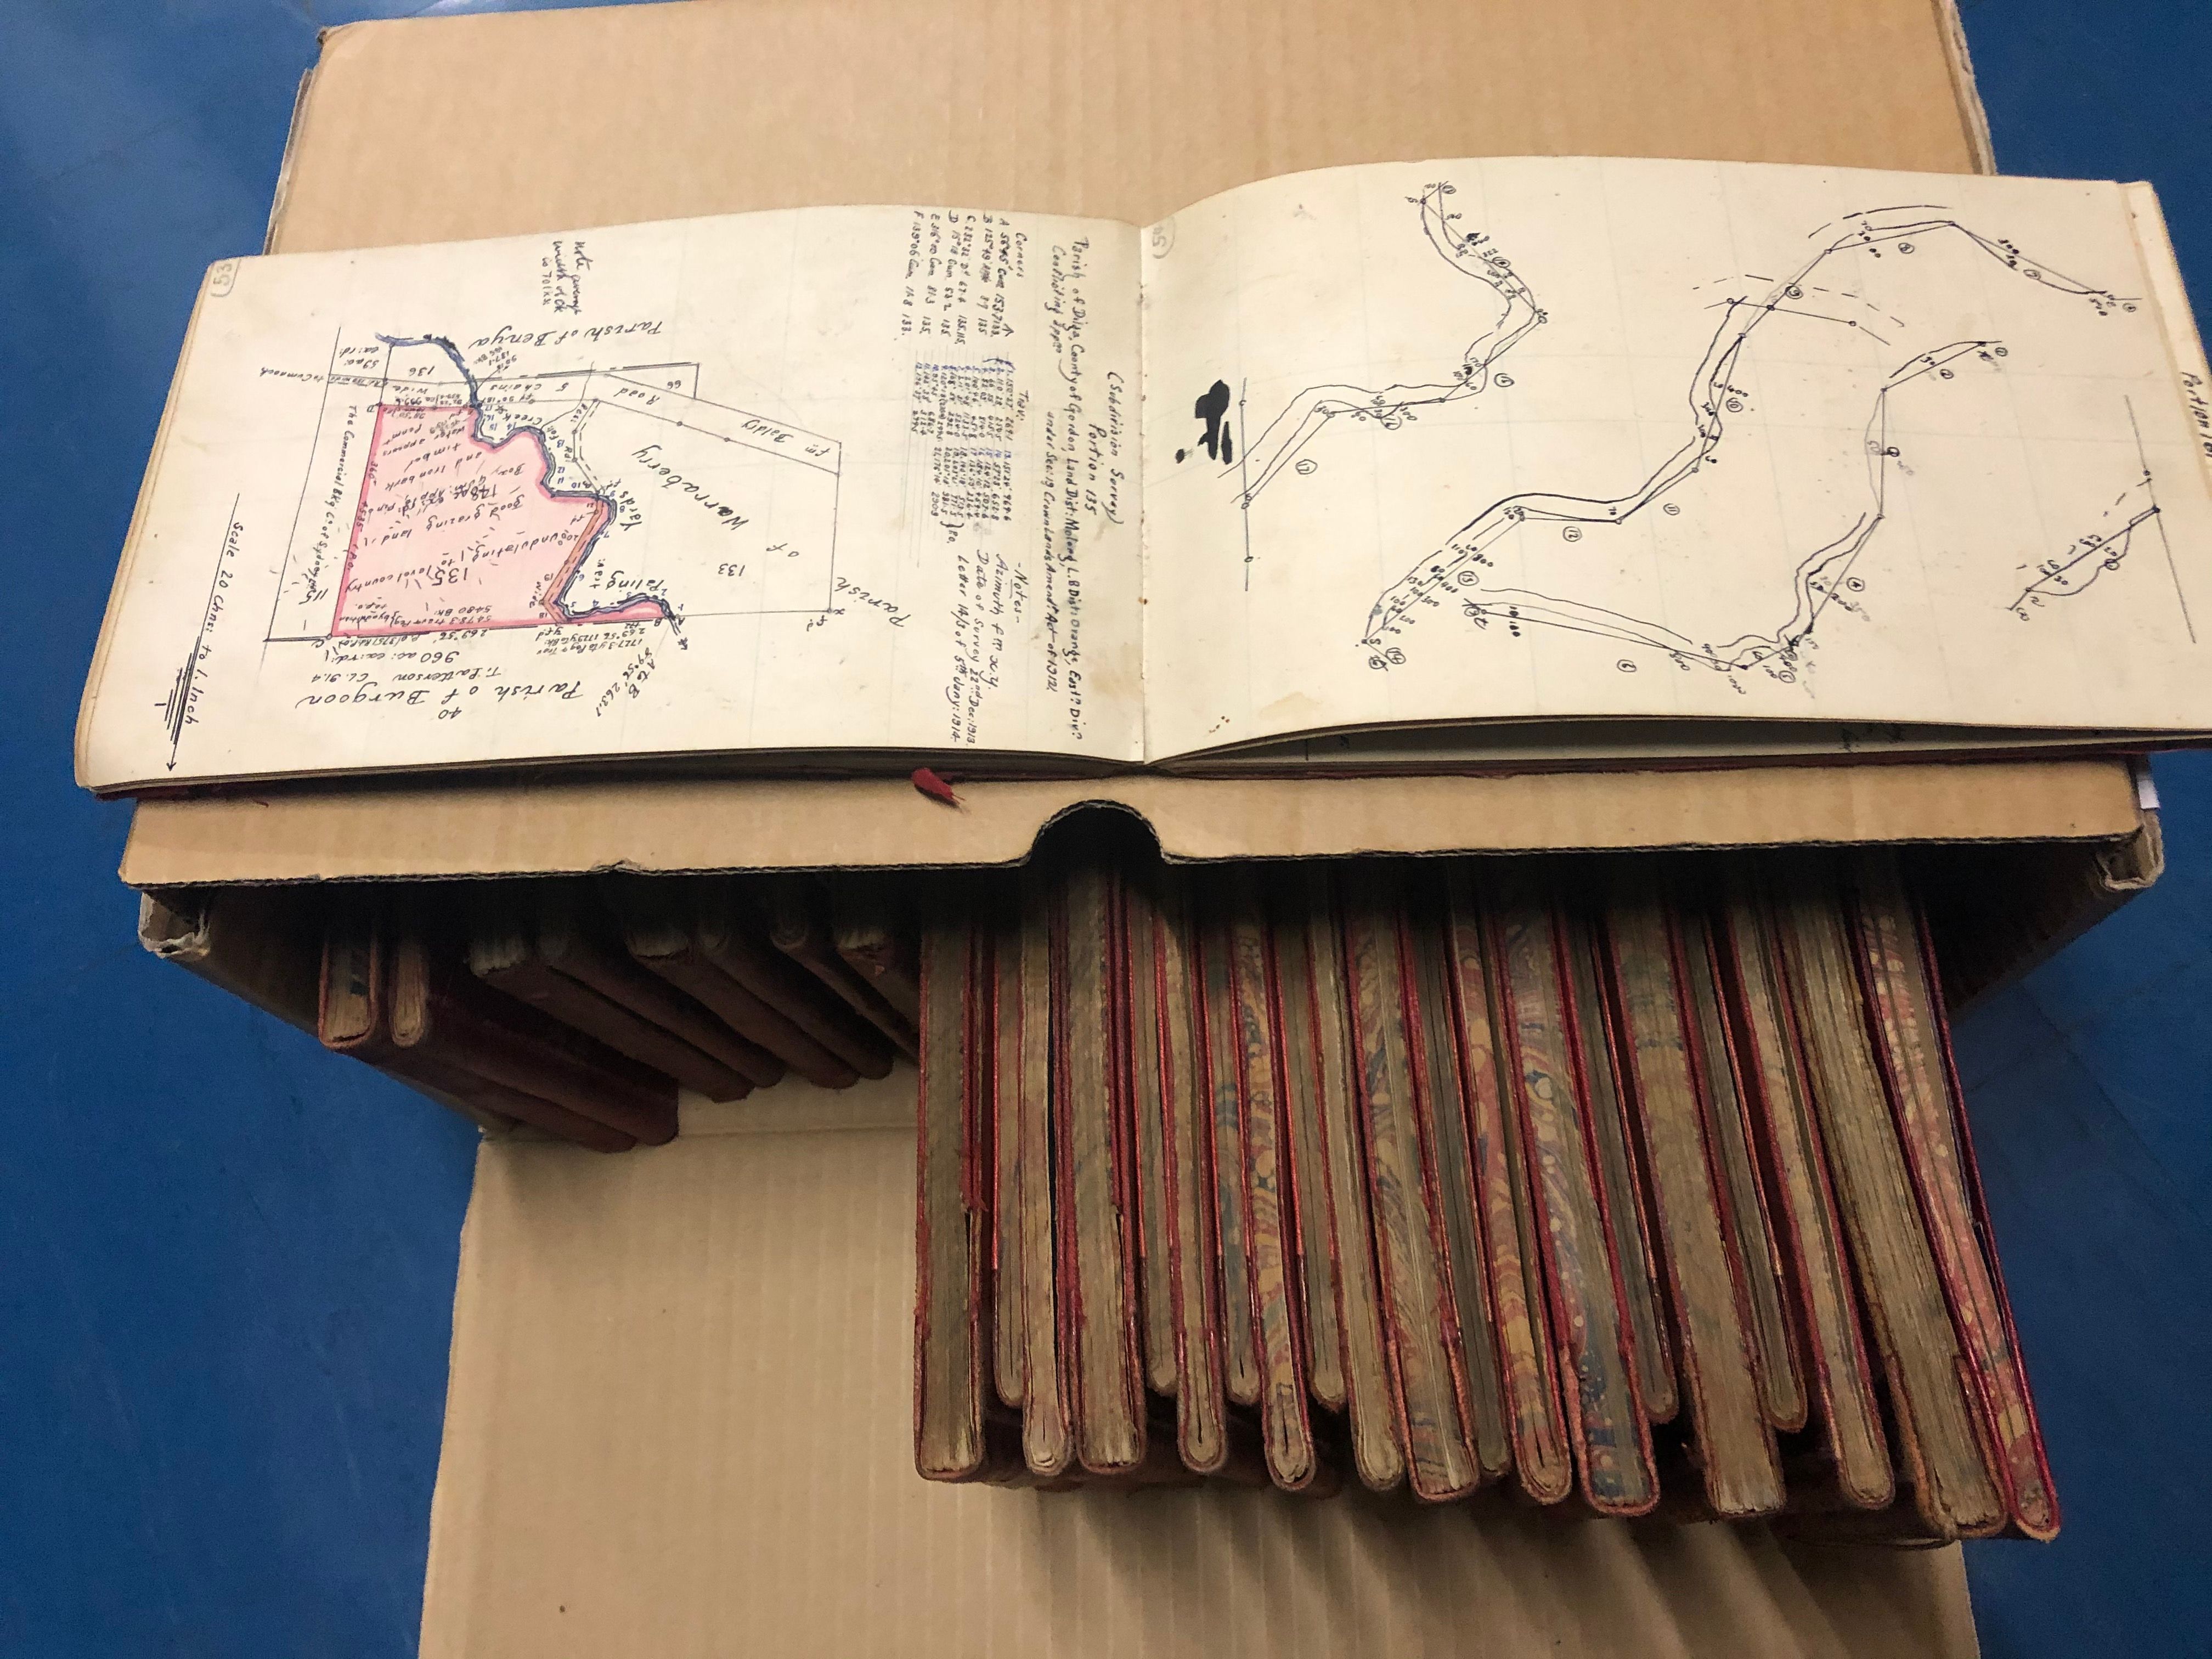 A sketch book by a surveyor sits on top of the box it is stored in